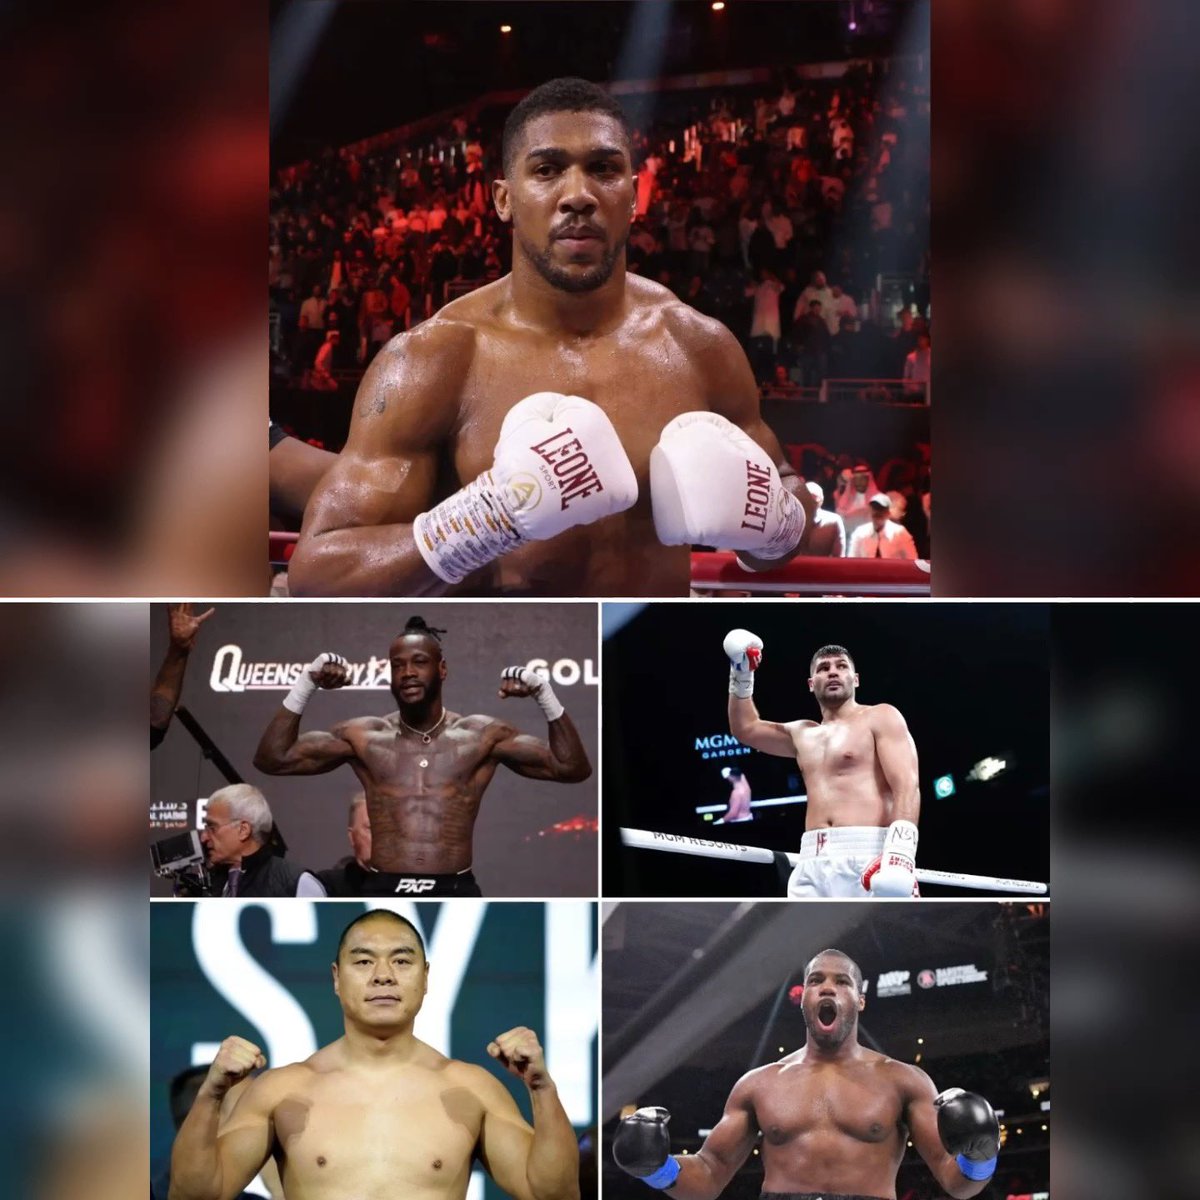 𝐀𝐉 𝐛𝐚𝐜𝐤 𝐚𝐭 𝐖𝐞𝐦𝐛𝐥𝐞𝐲? 🇬🇧 Who would you like to see next for Anthony Joshua? #boxing